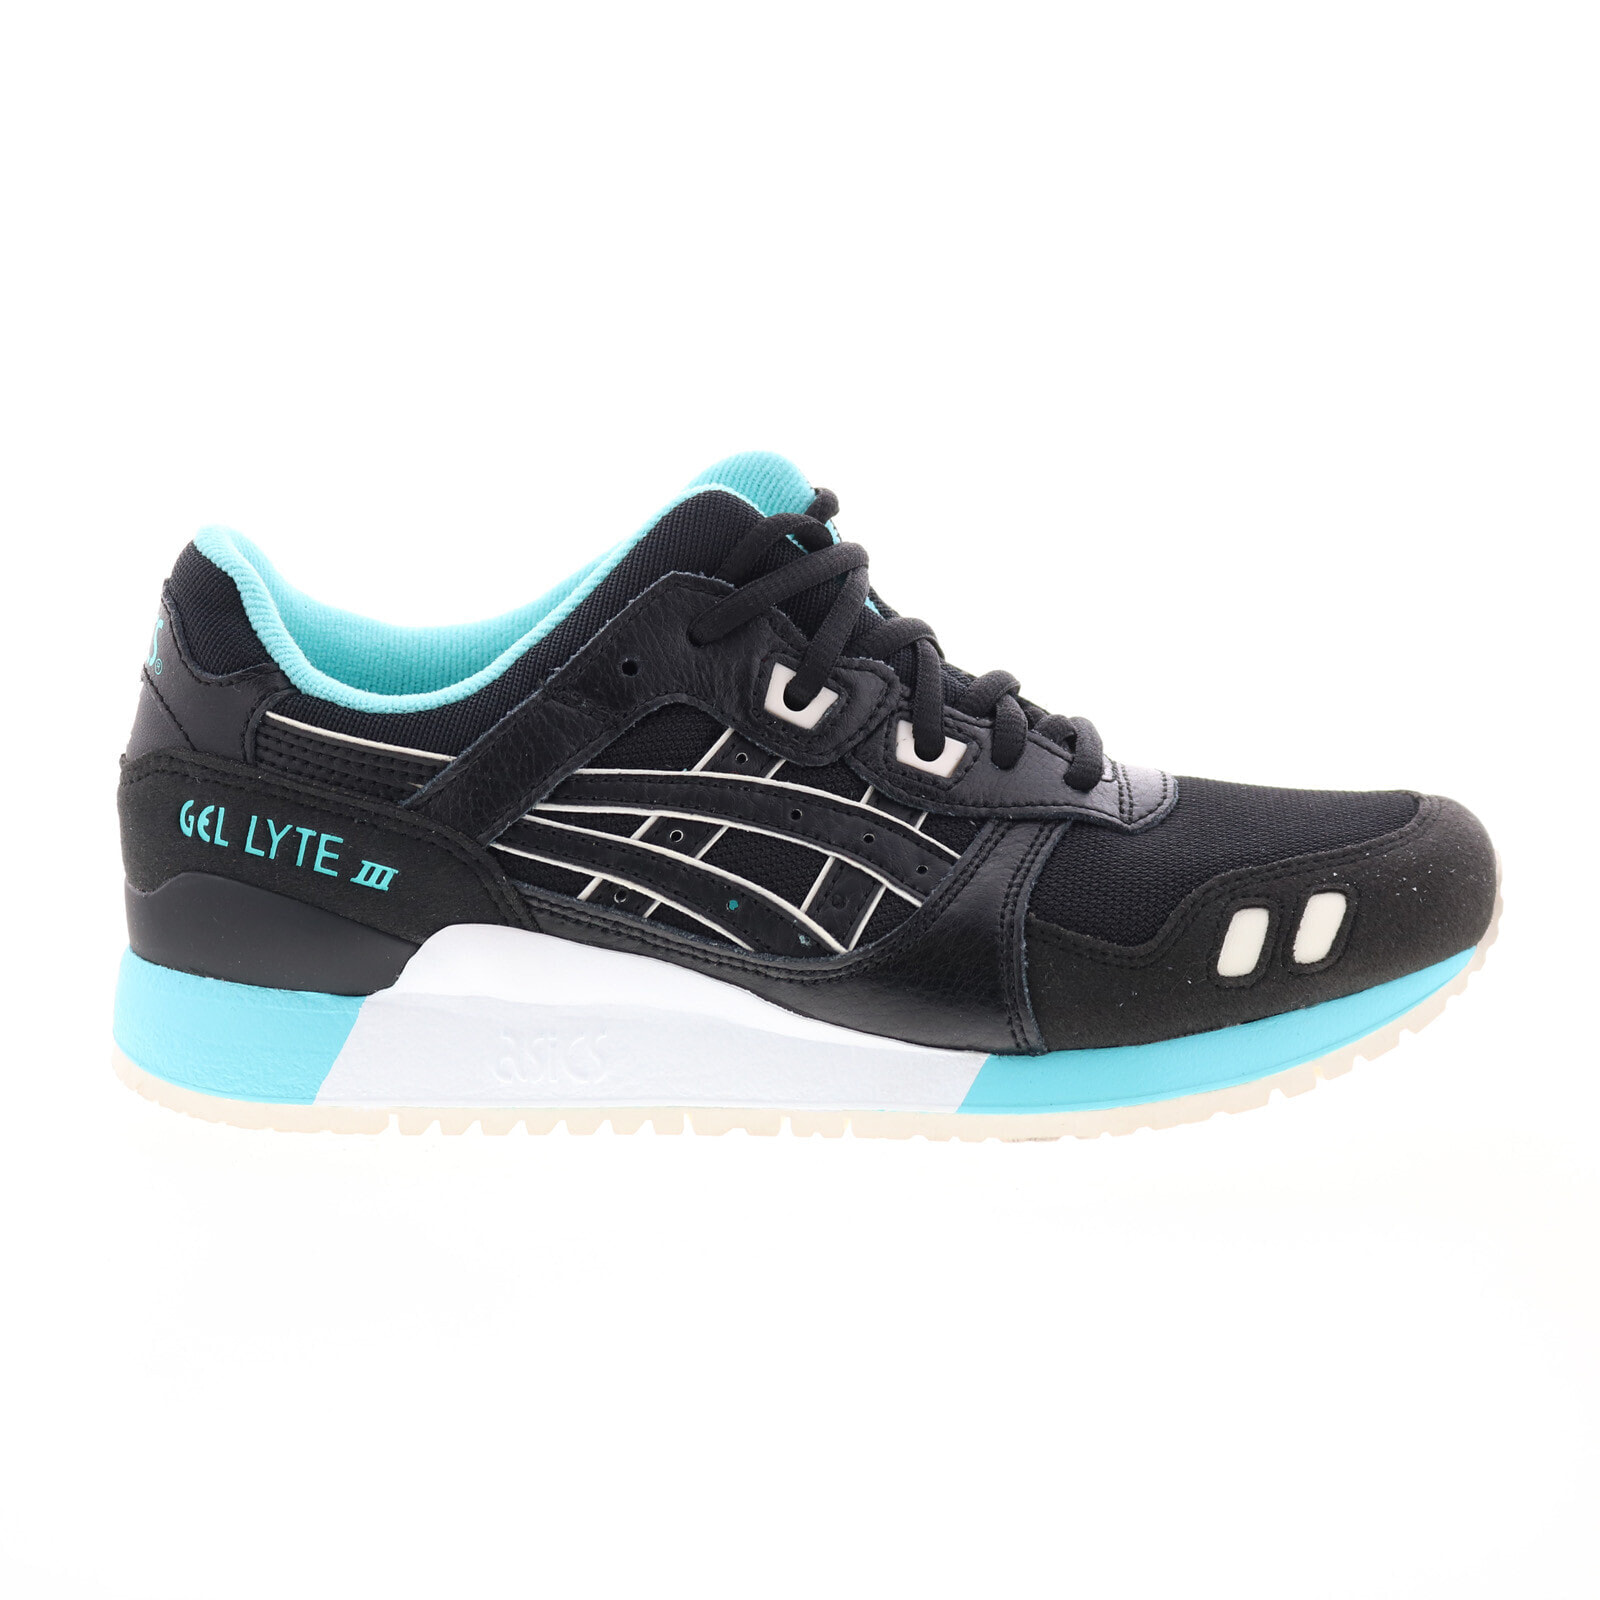 Asics Gel-Lyte III 1191A223-001 Mens Black Lifestyle Sneakers Shoes